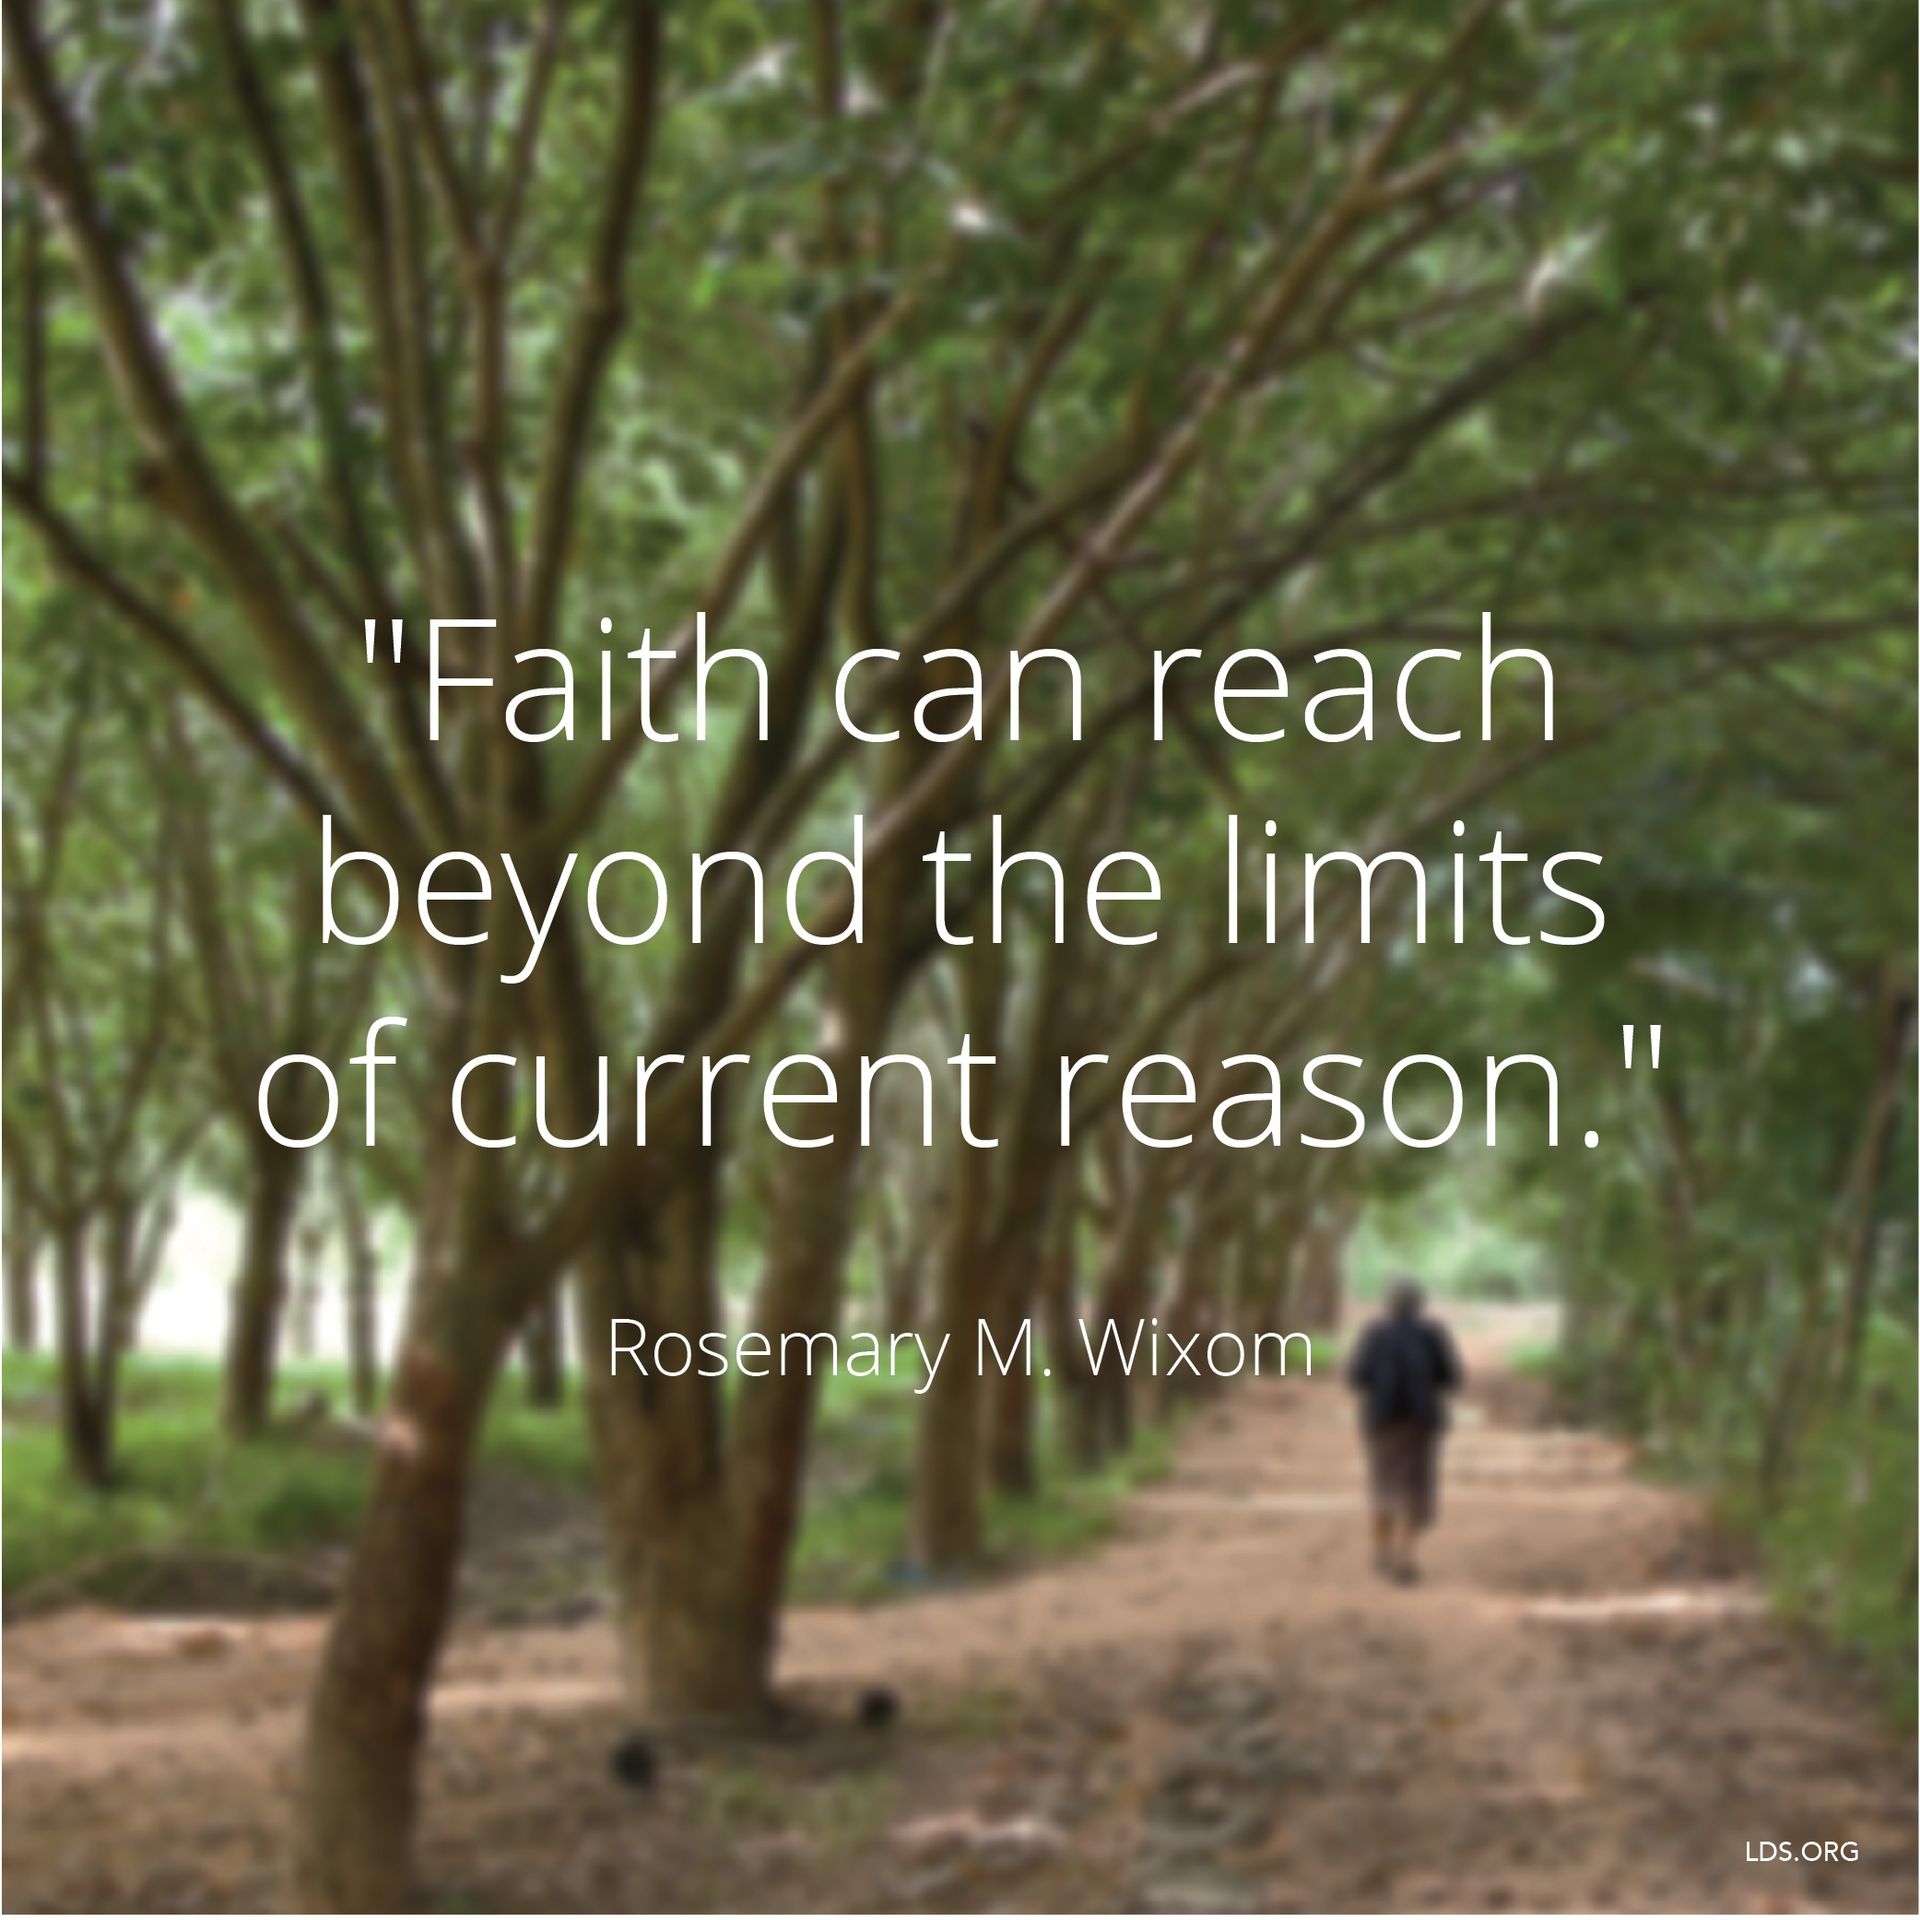 “Faith can reach beyond the limits of current reason.”—Sister Rosemary M. Wixom, “Returning to Faith” © undefined ipCode 1.